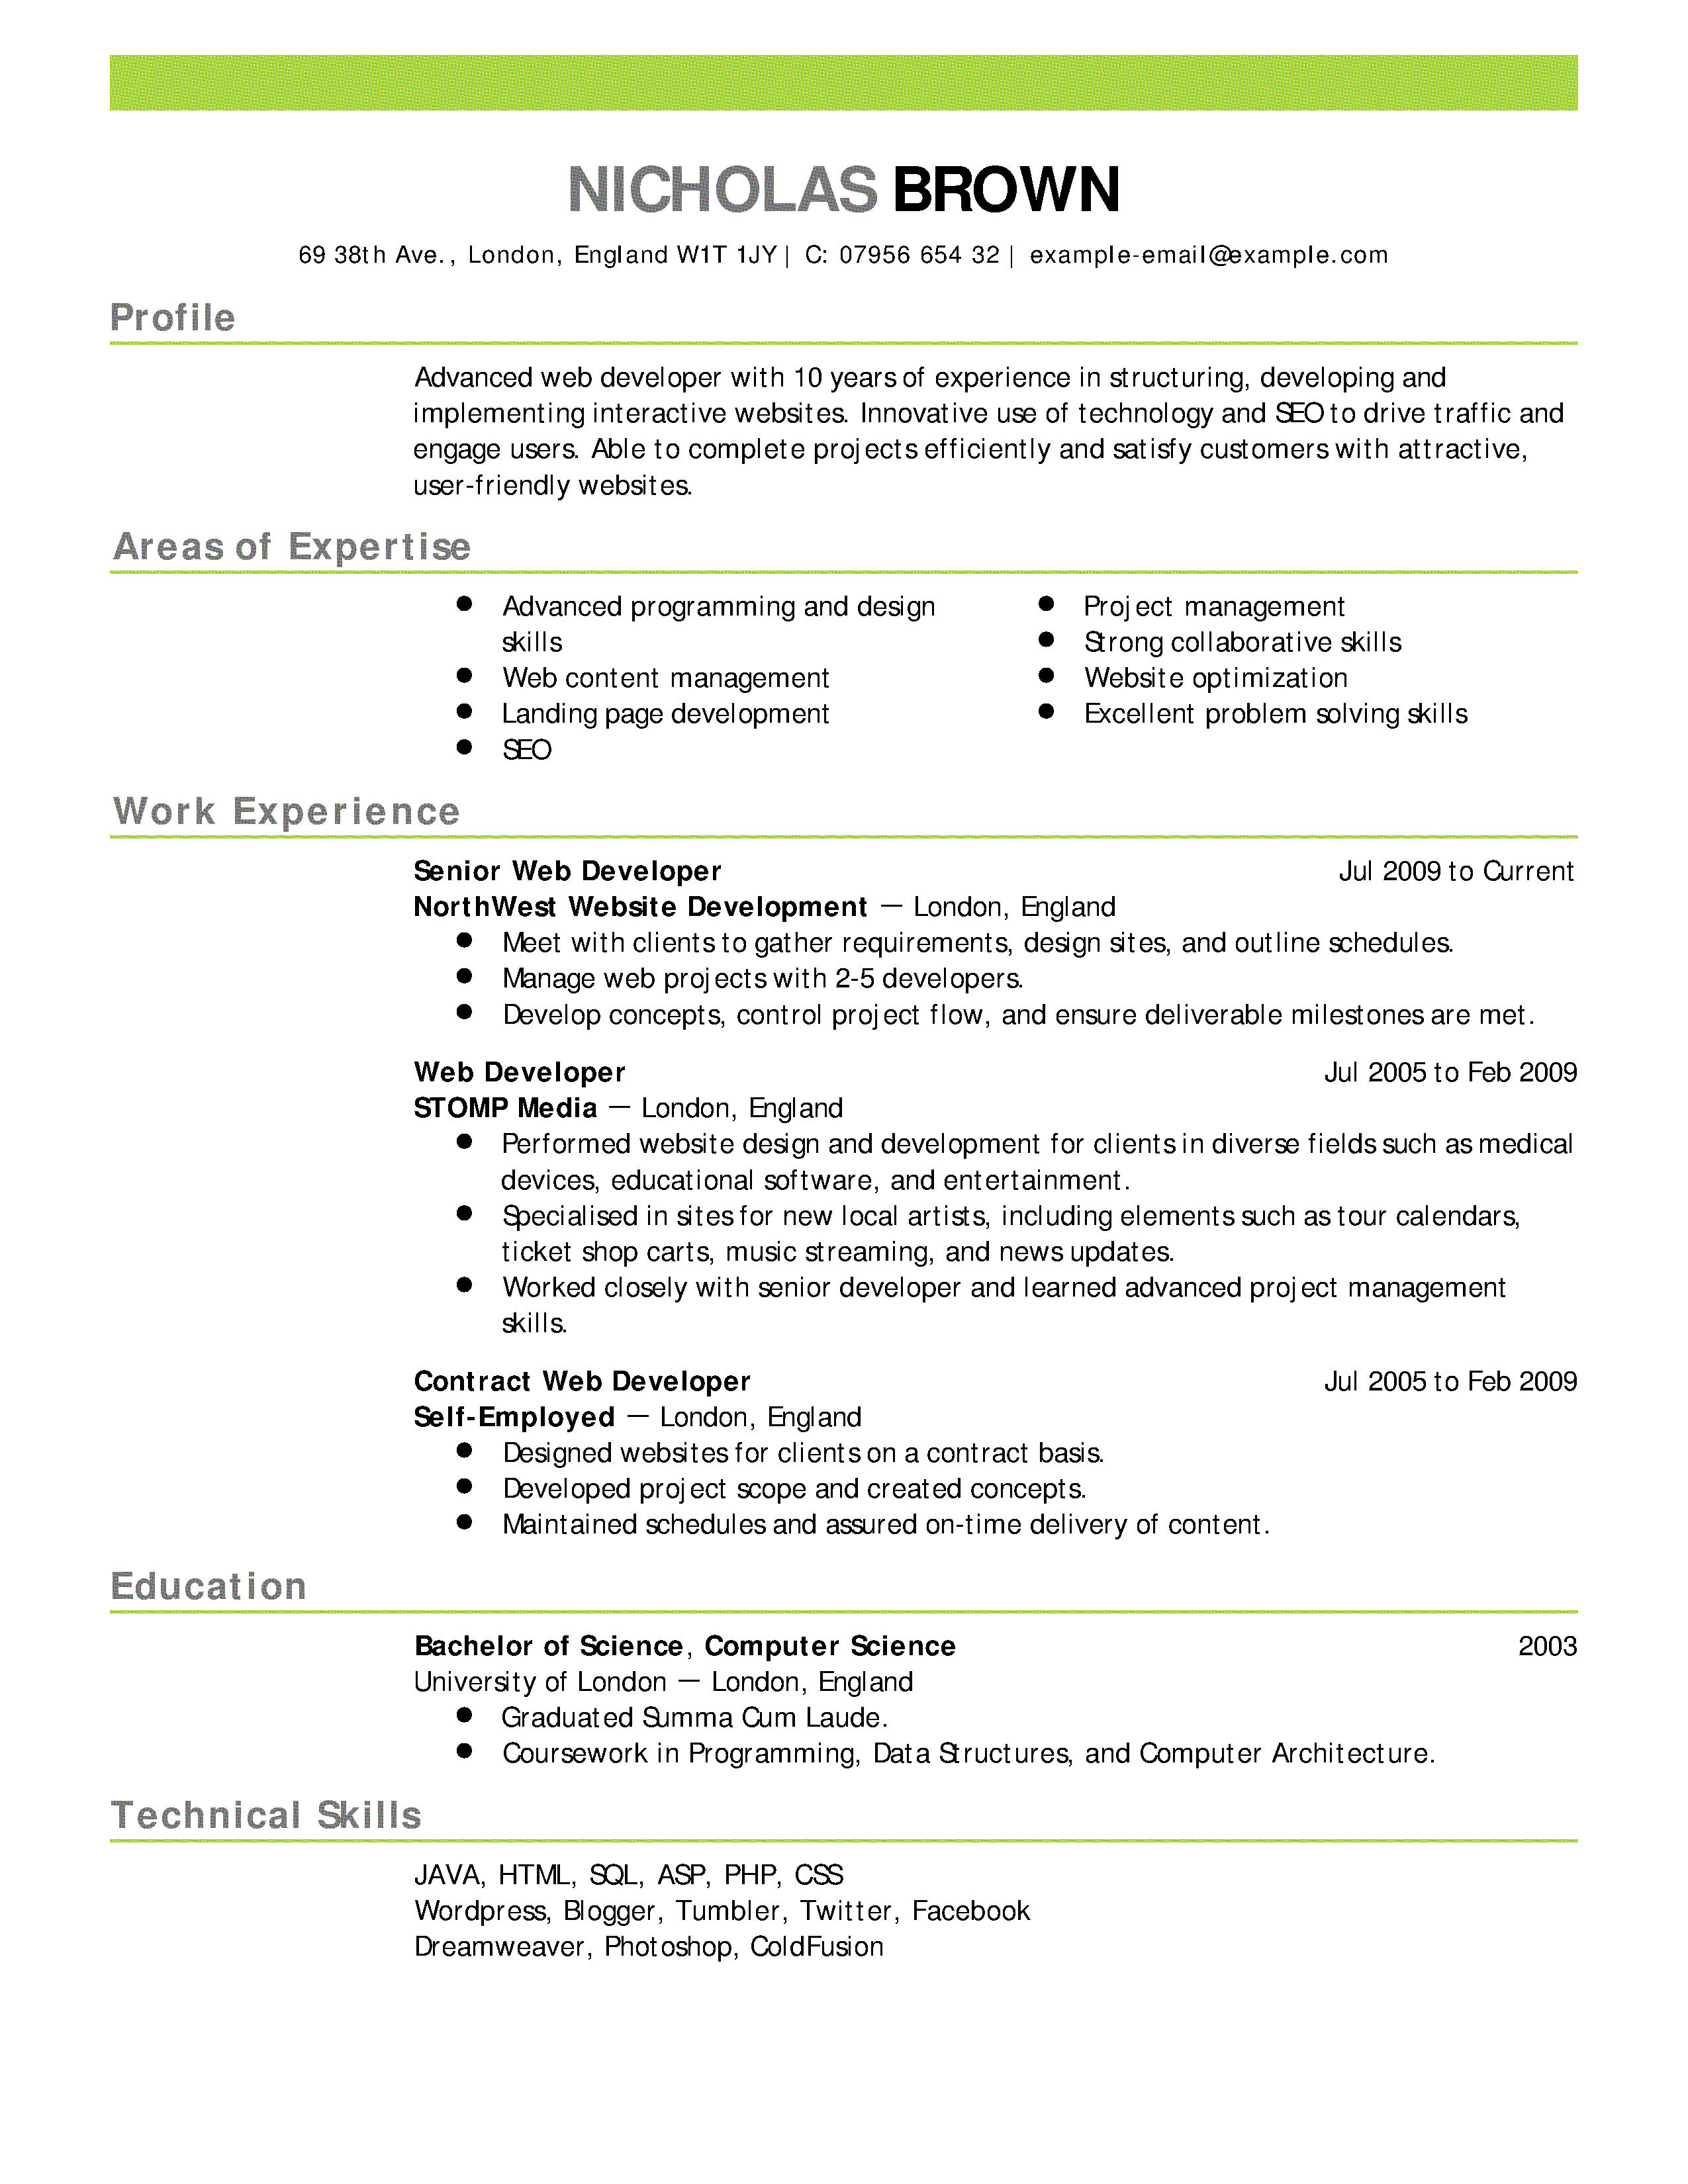 Free Resume Examples by Industry & Job Title | LiveCareer